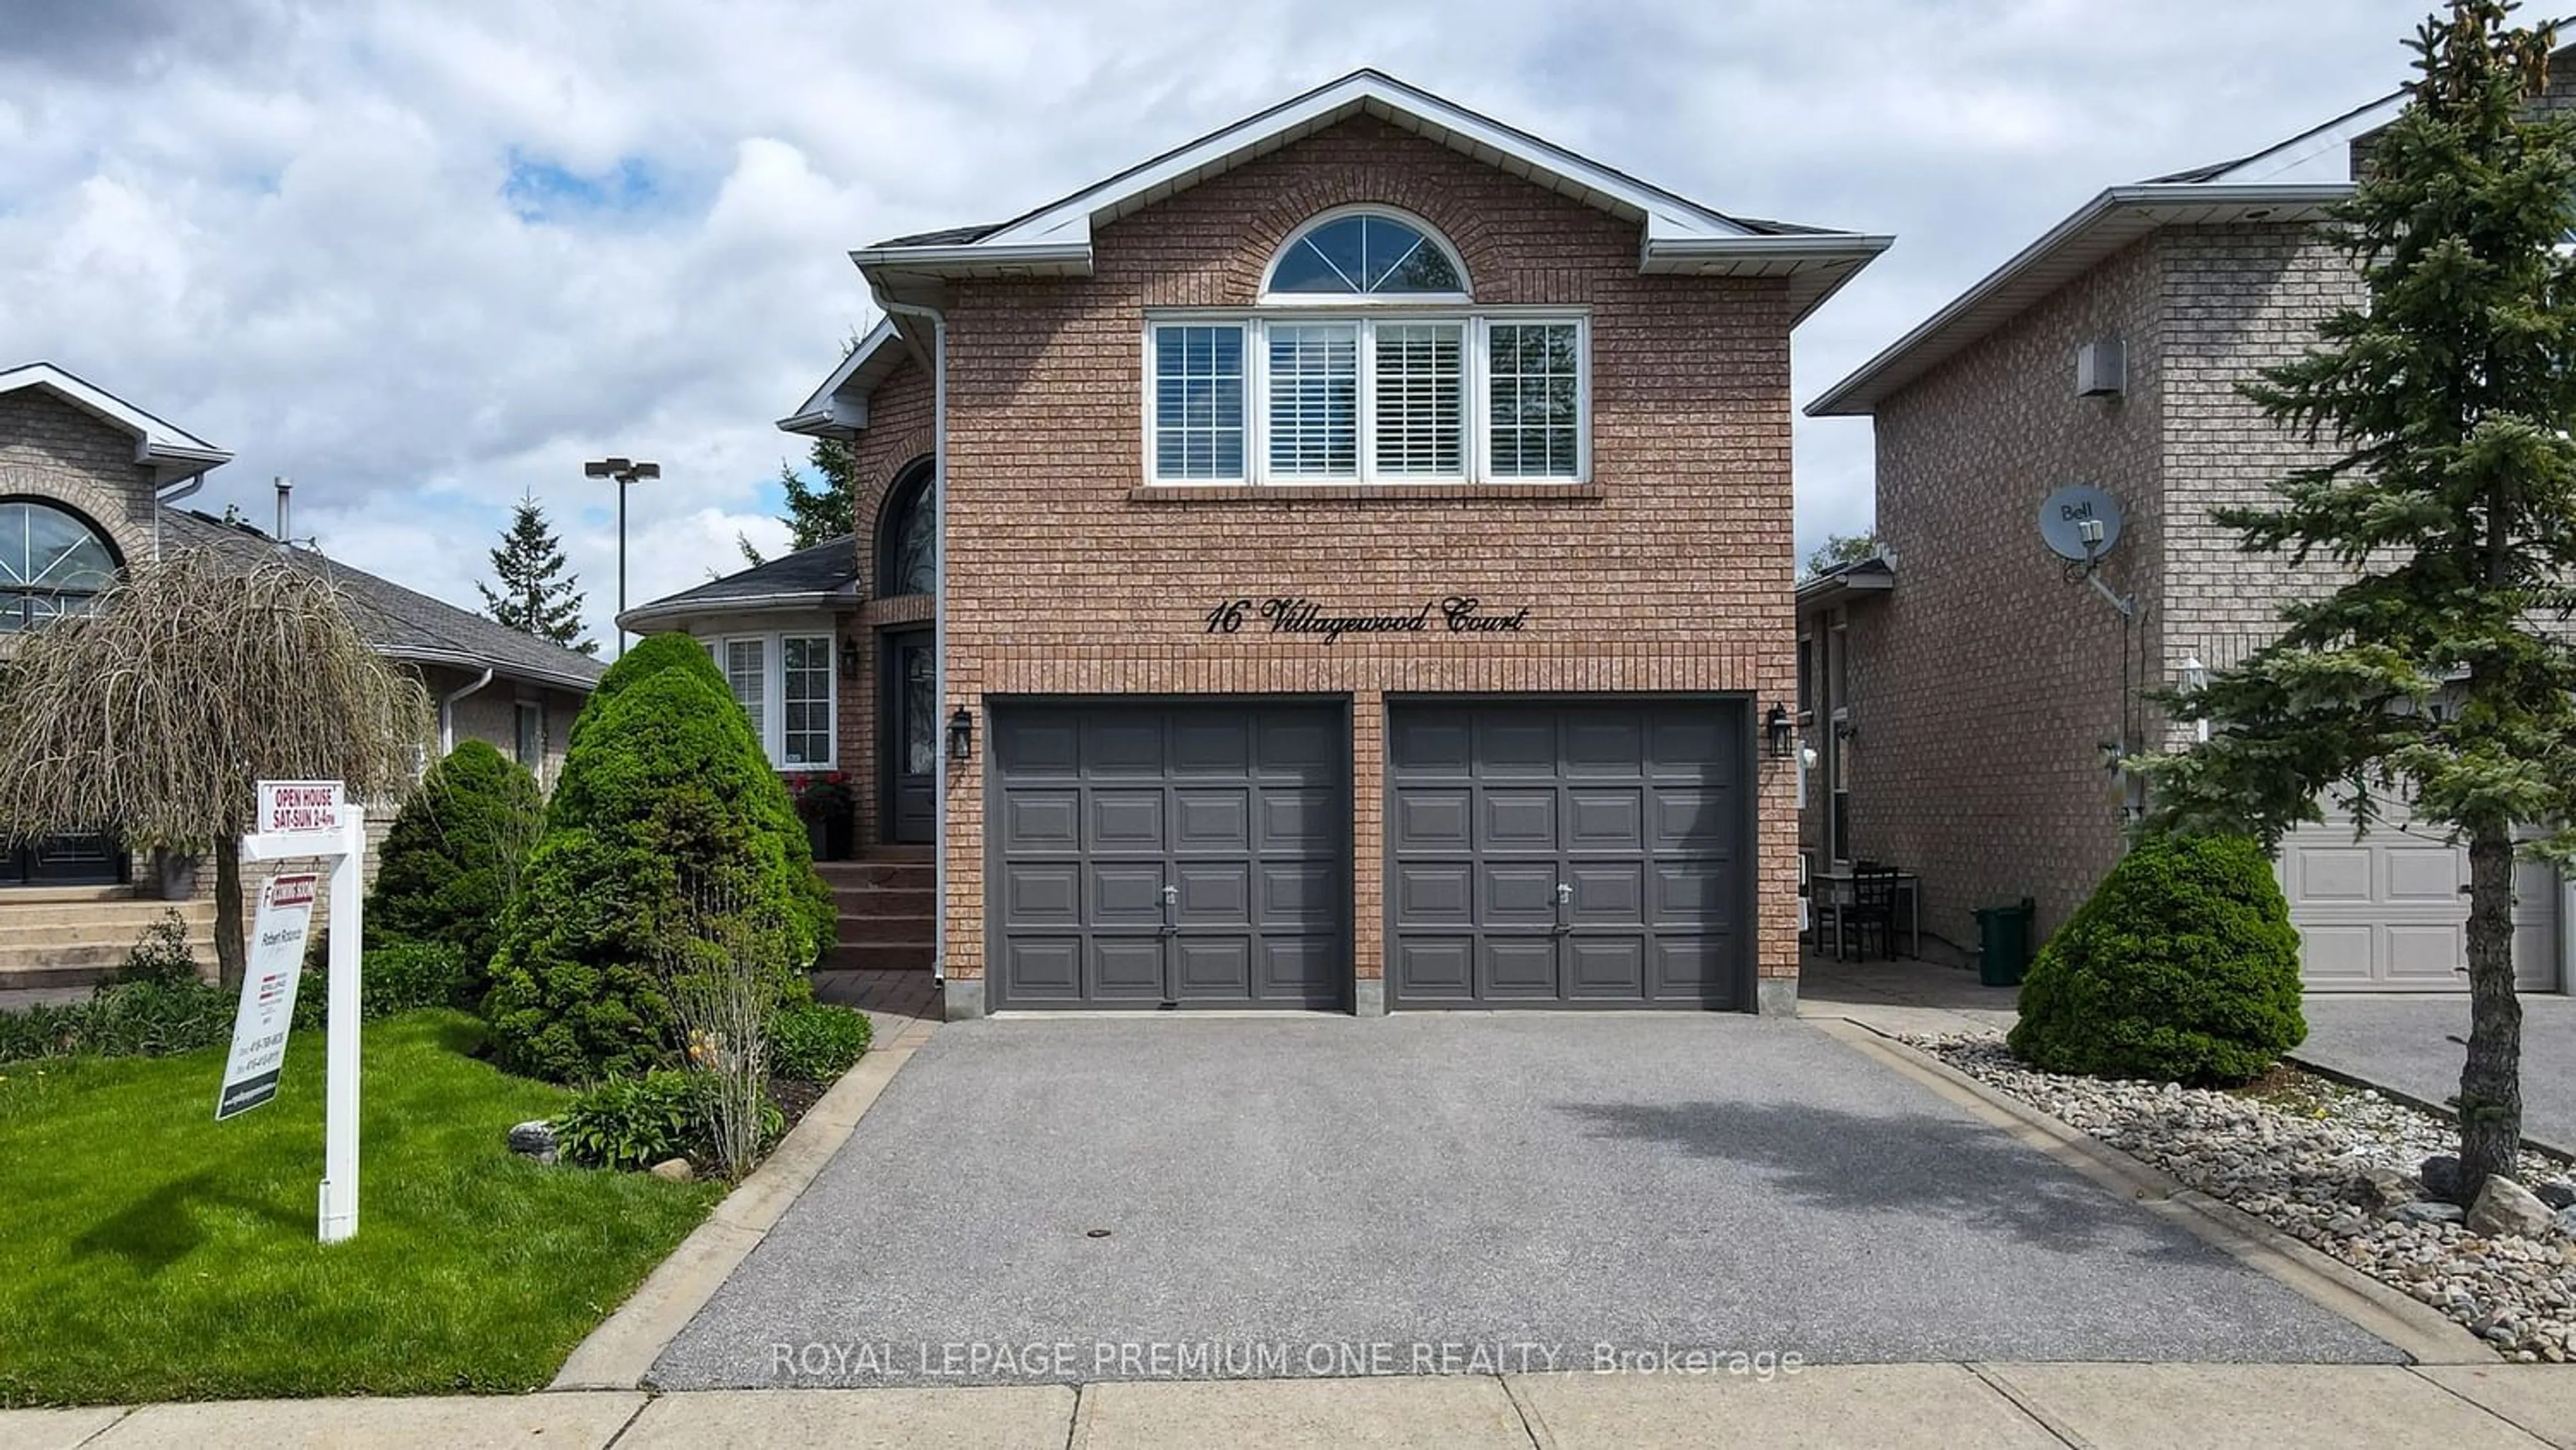 Home with brick exterior material for 16 Villagewood Crt, Vaughan Ontario L4L 8V9